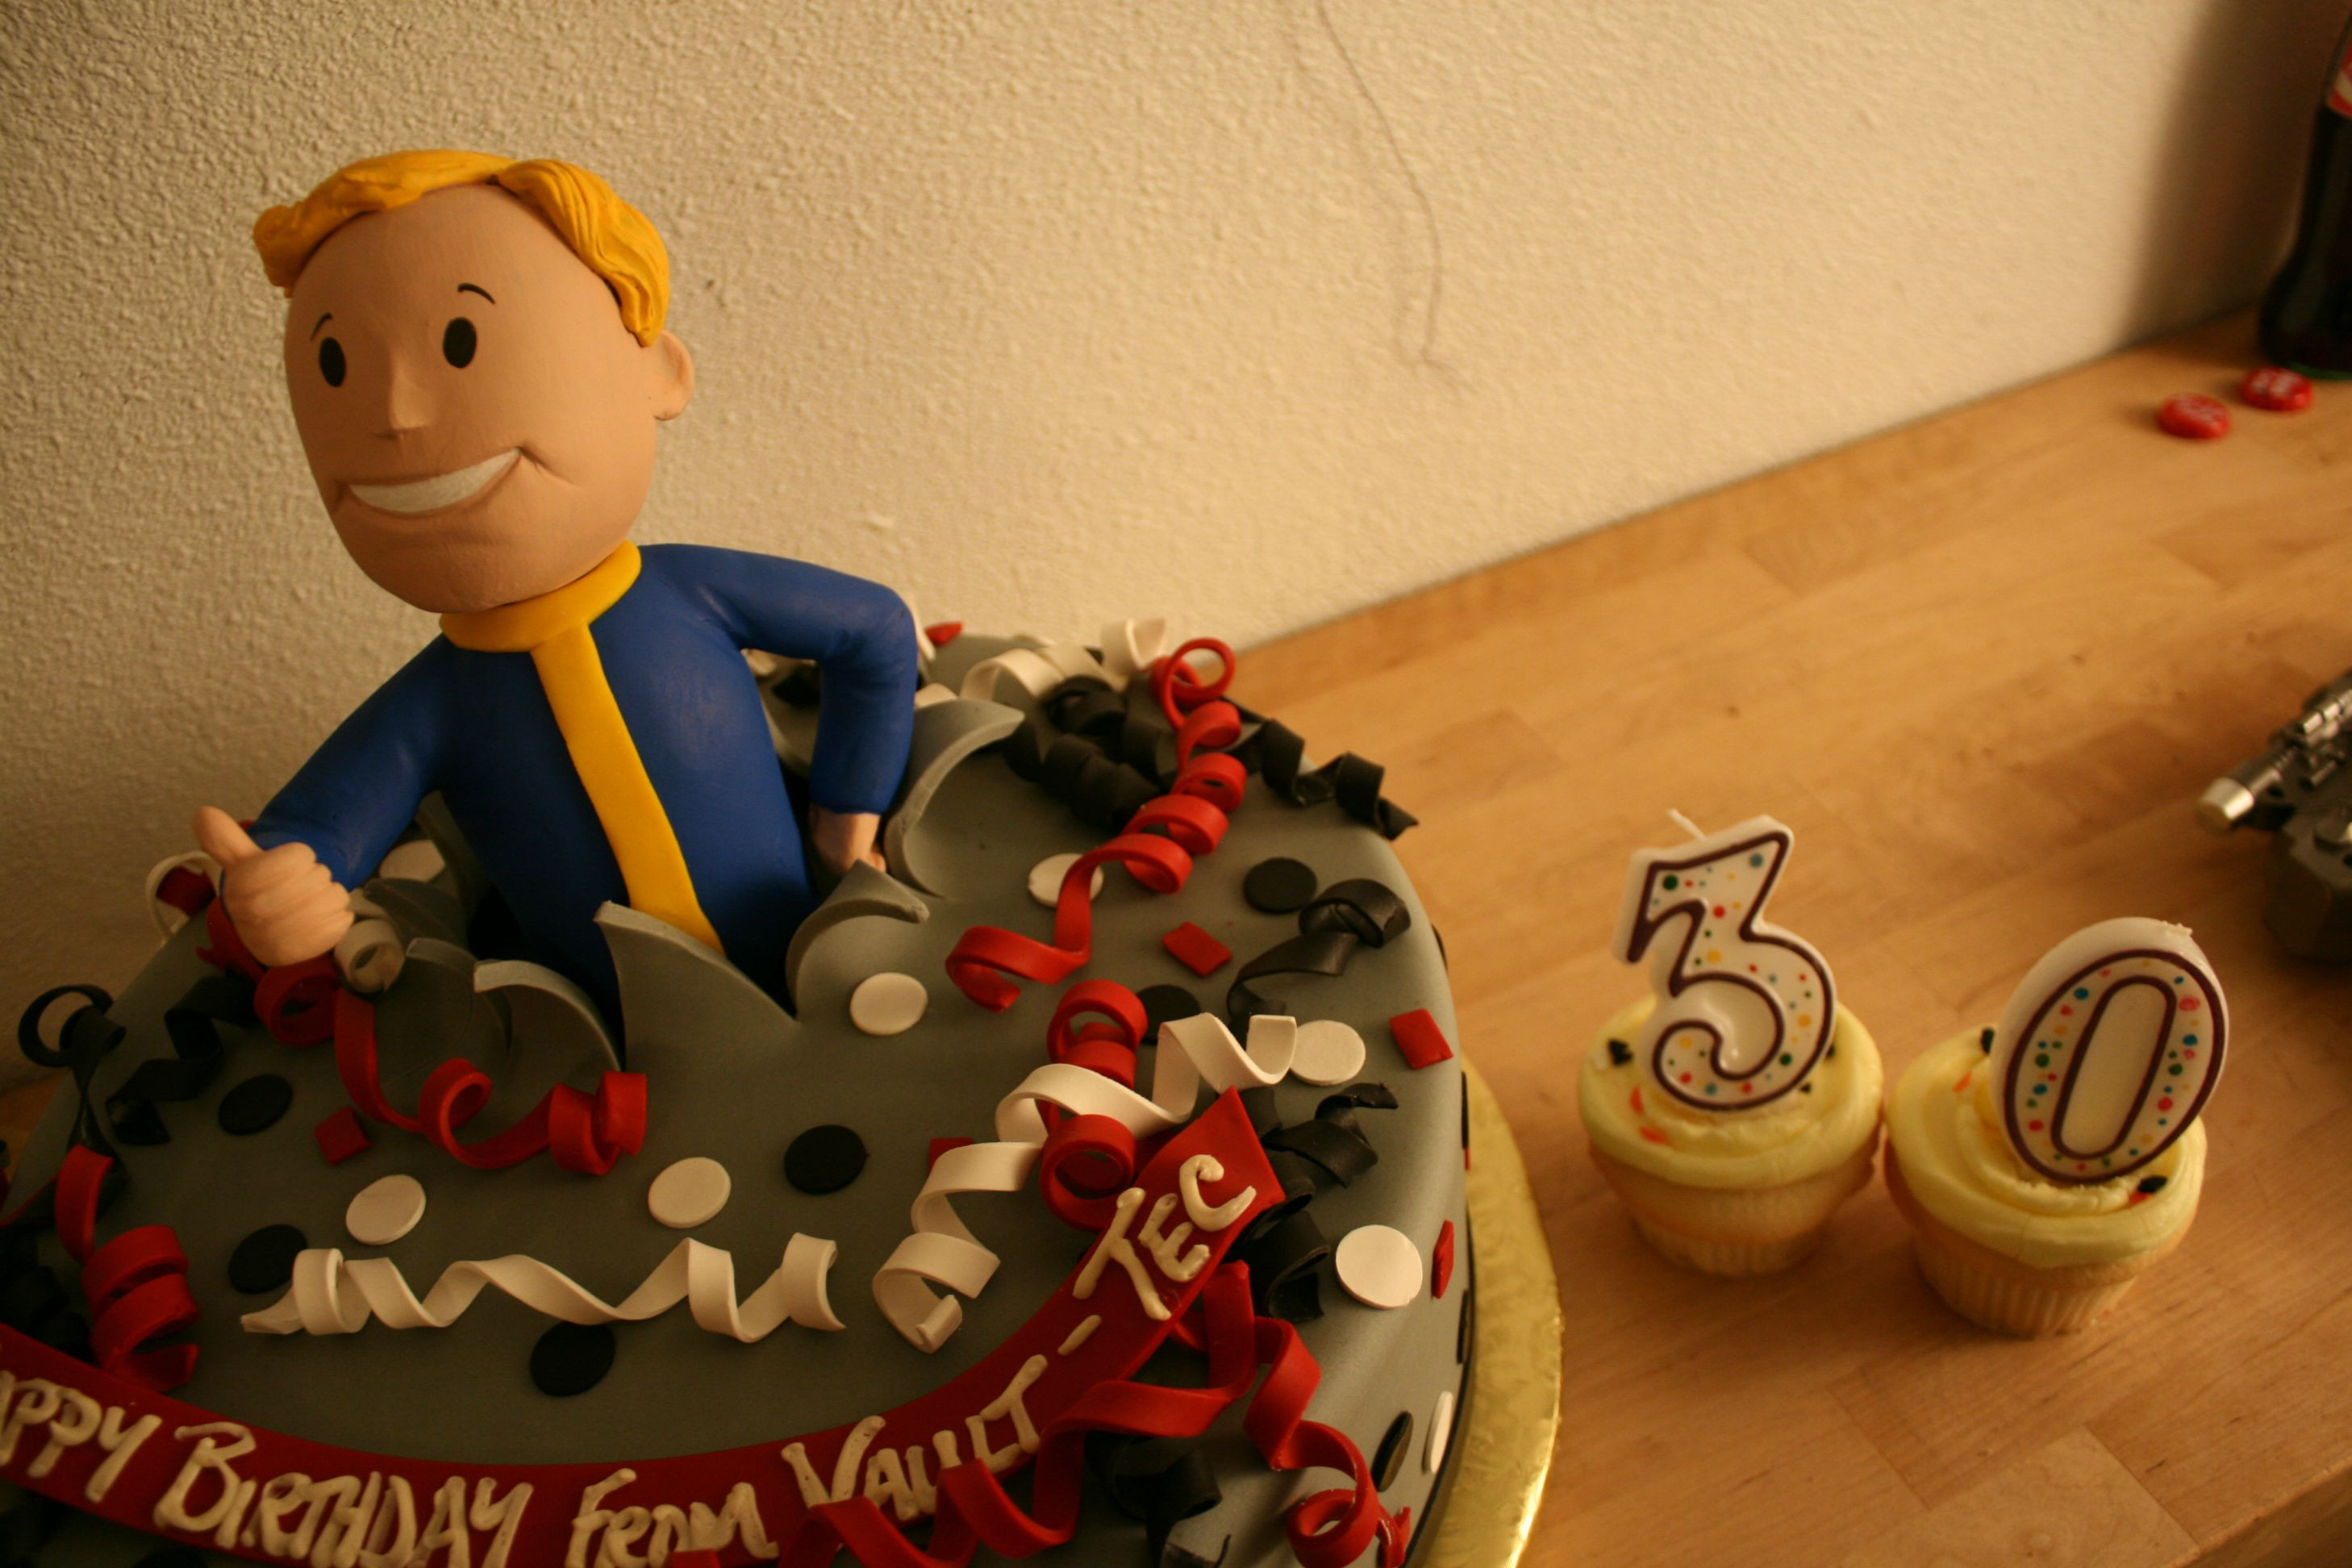 Fallout Birthday Cake
 Man Turns Basement Into Fallout Vault For Birthday Party